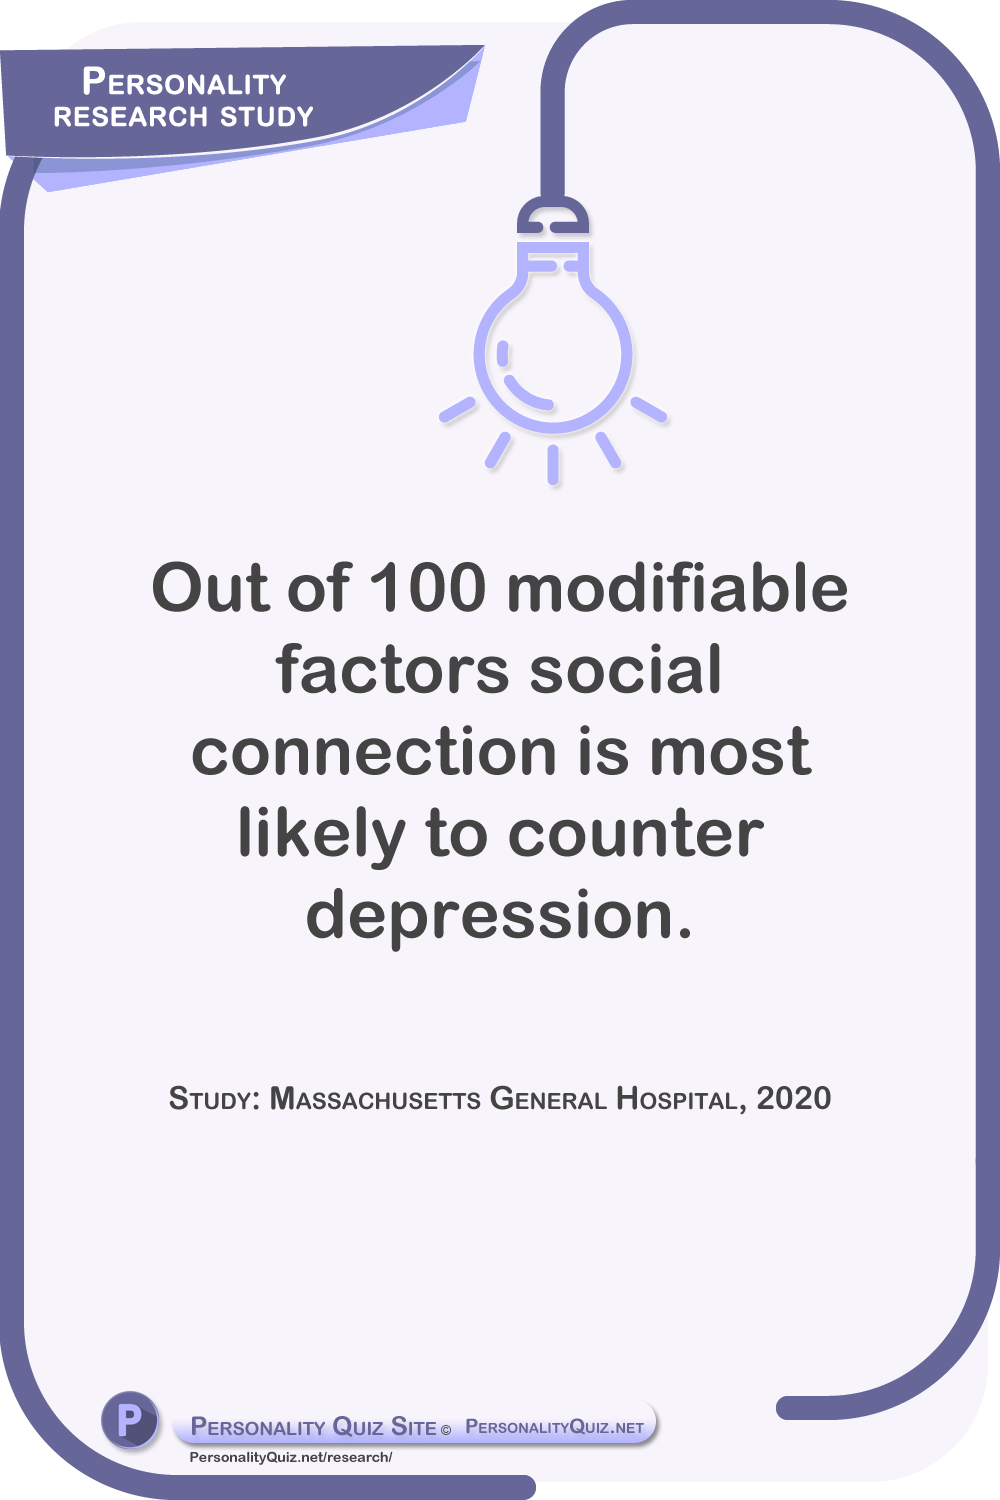 Out of 100 modifiable factors social connection is most likely to counter depression. Study: Massachusetts General Hospital, 2020